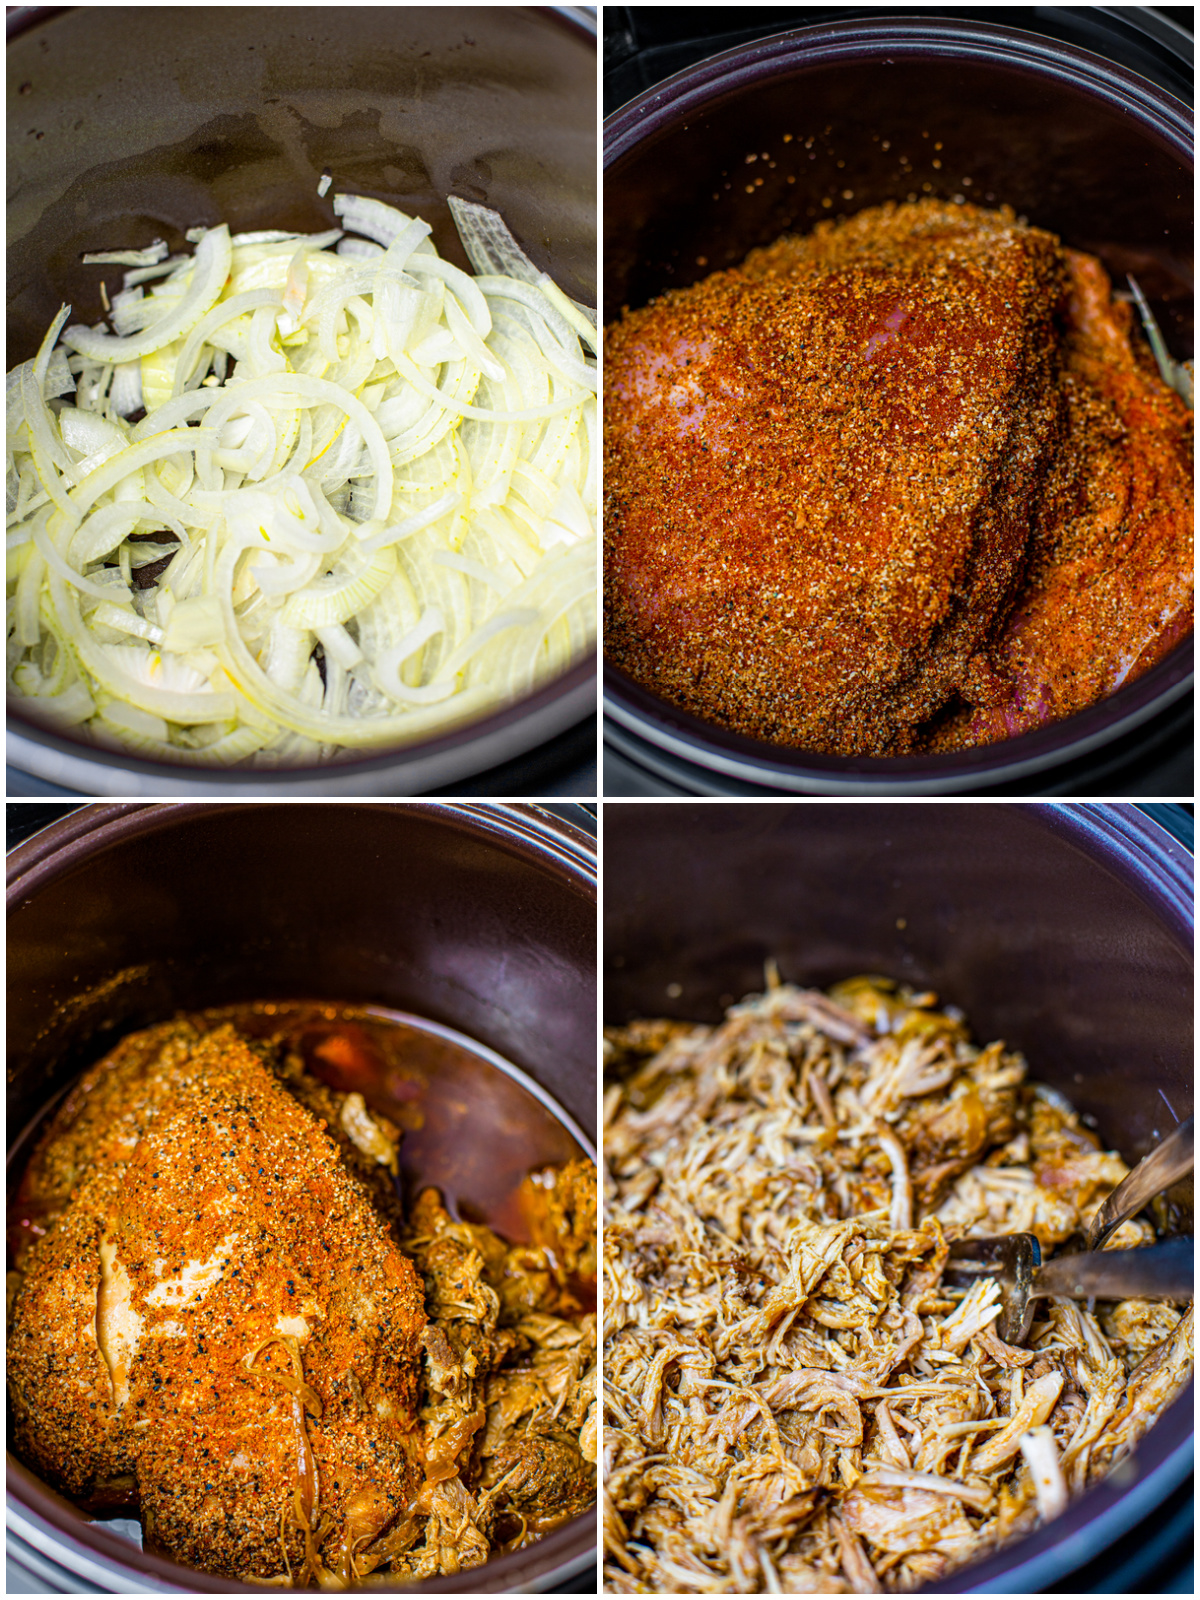 Step by step photos on how to make Crock Pot Pulled Pork